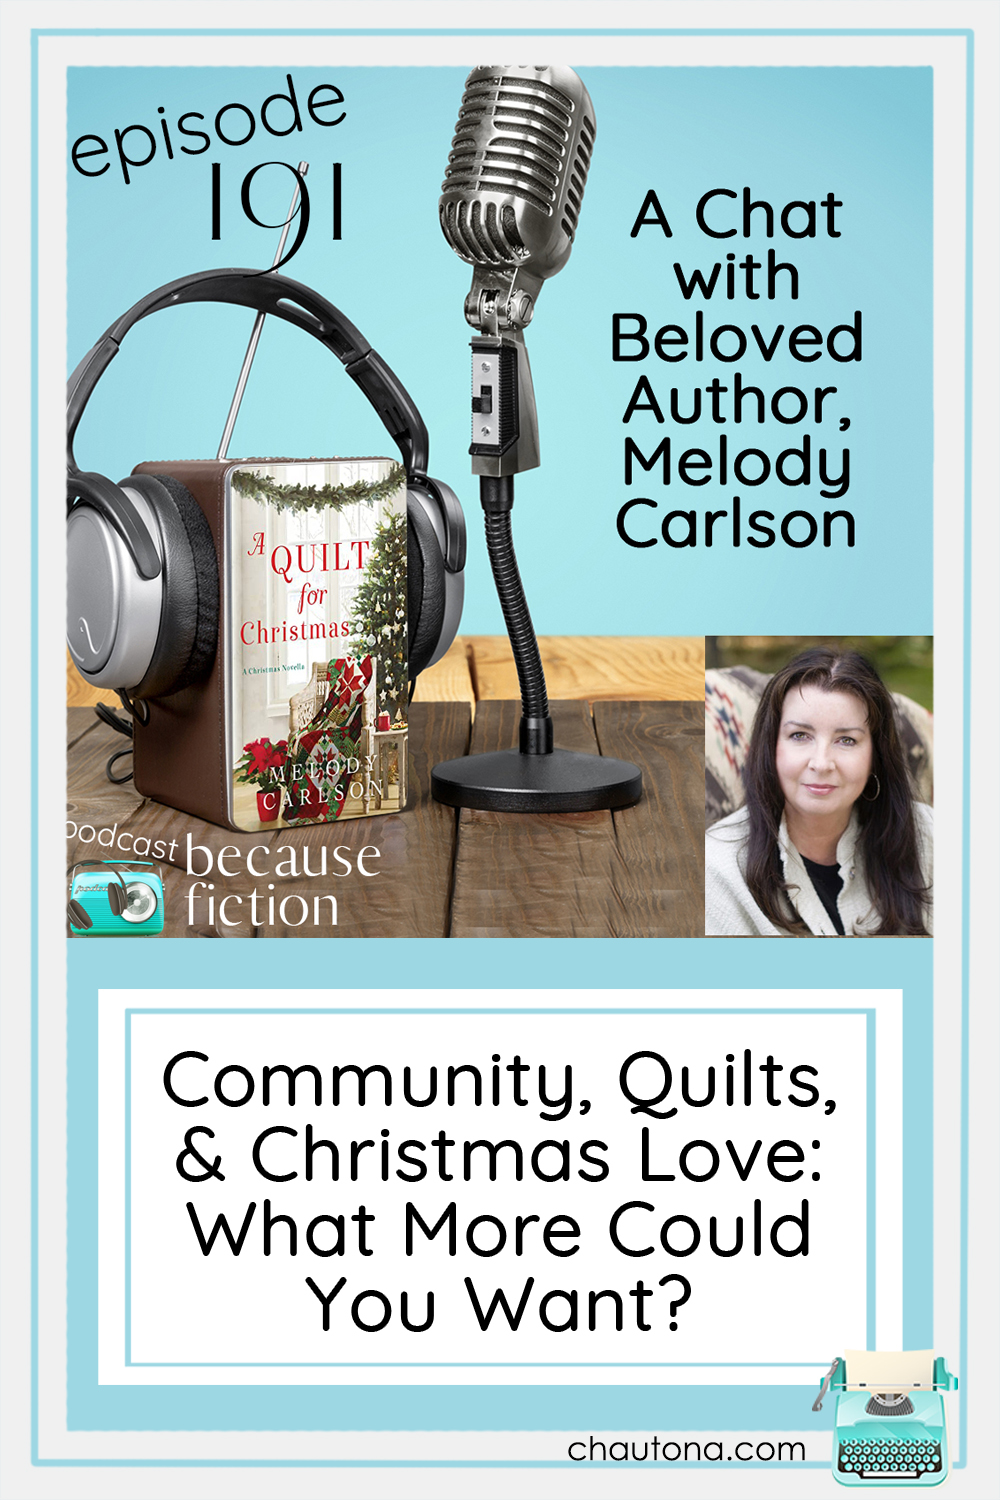 A Quilt for Christmas by Melody Carlson is getting rave reviews all over BookTube and after talking with her about it, I see why! via @chautonahavig